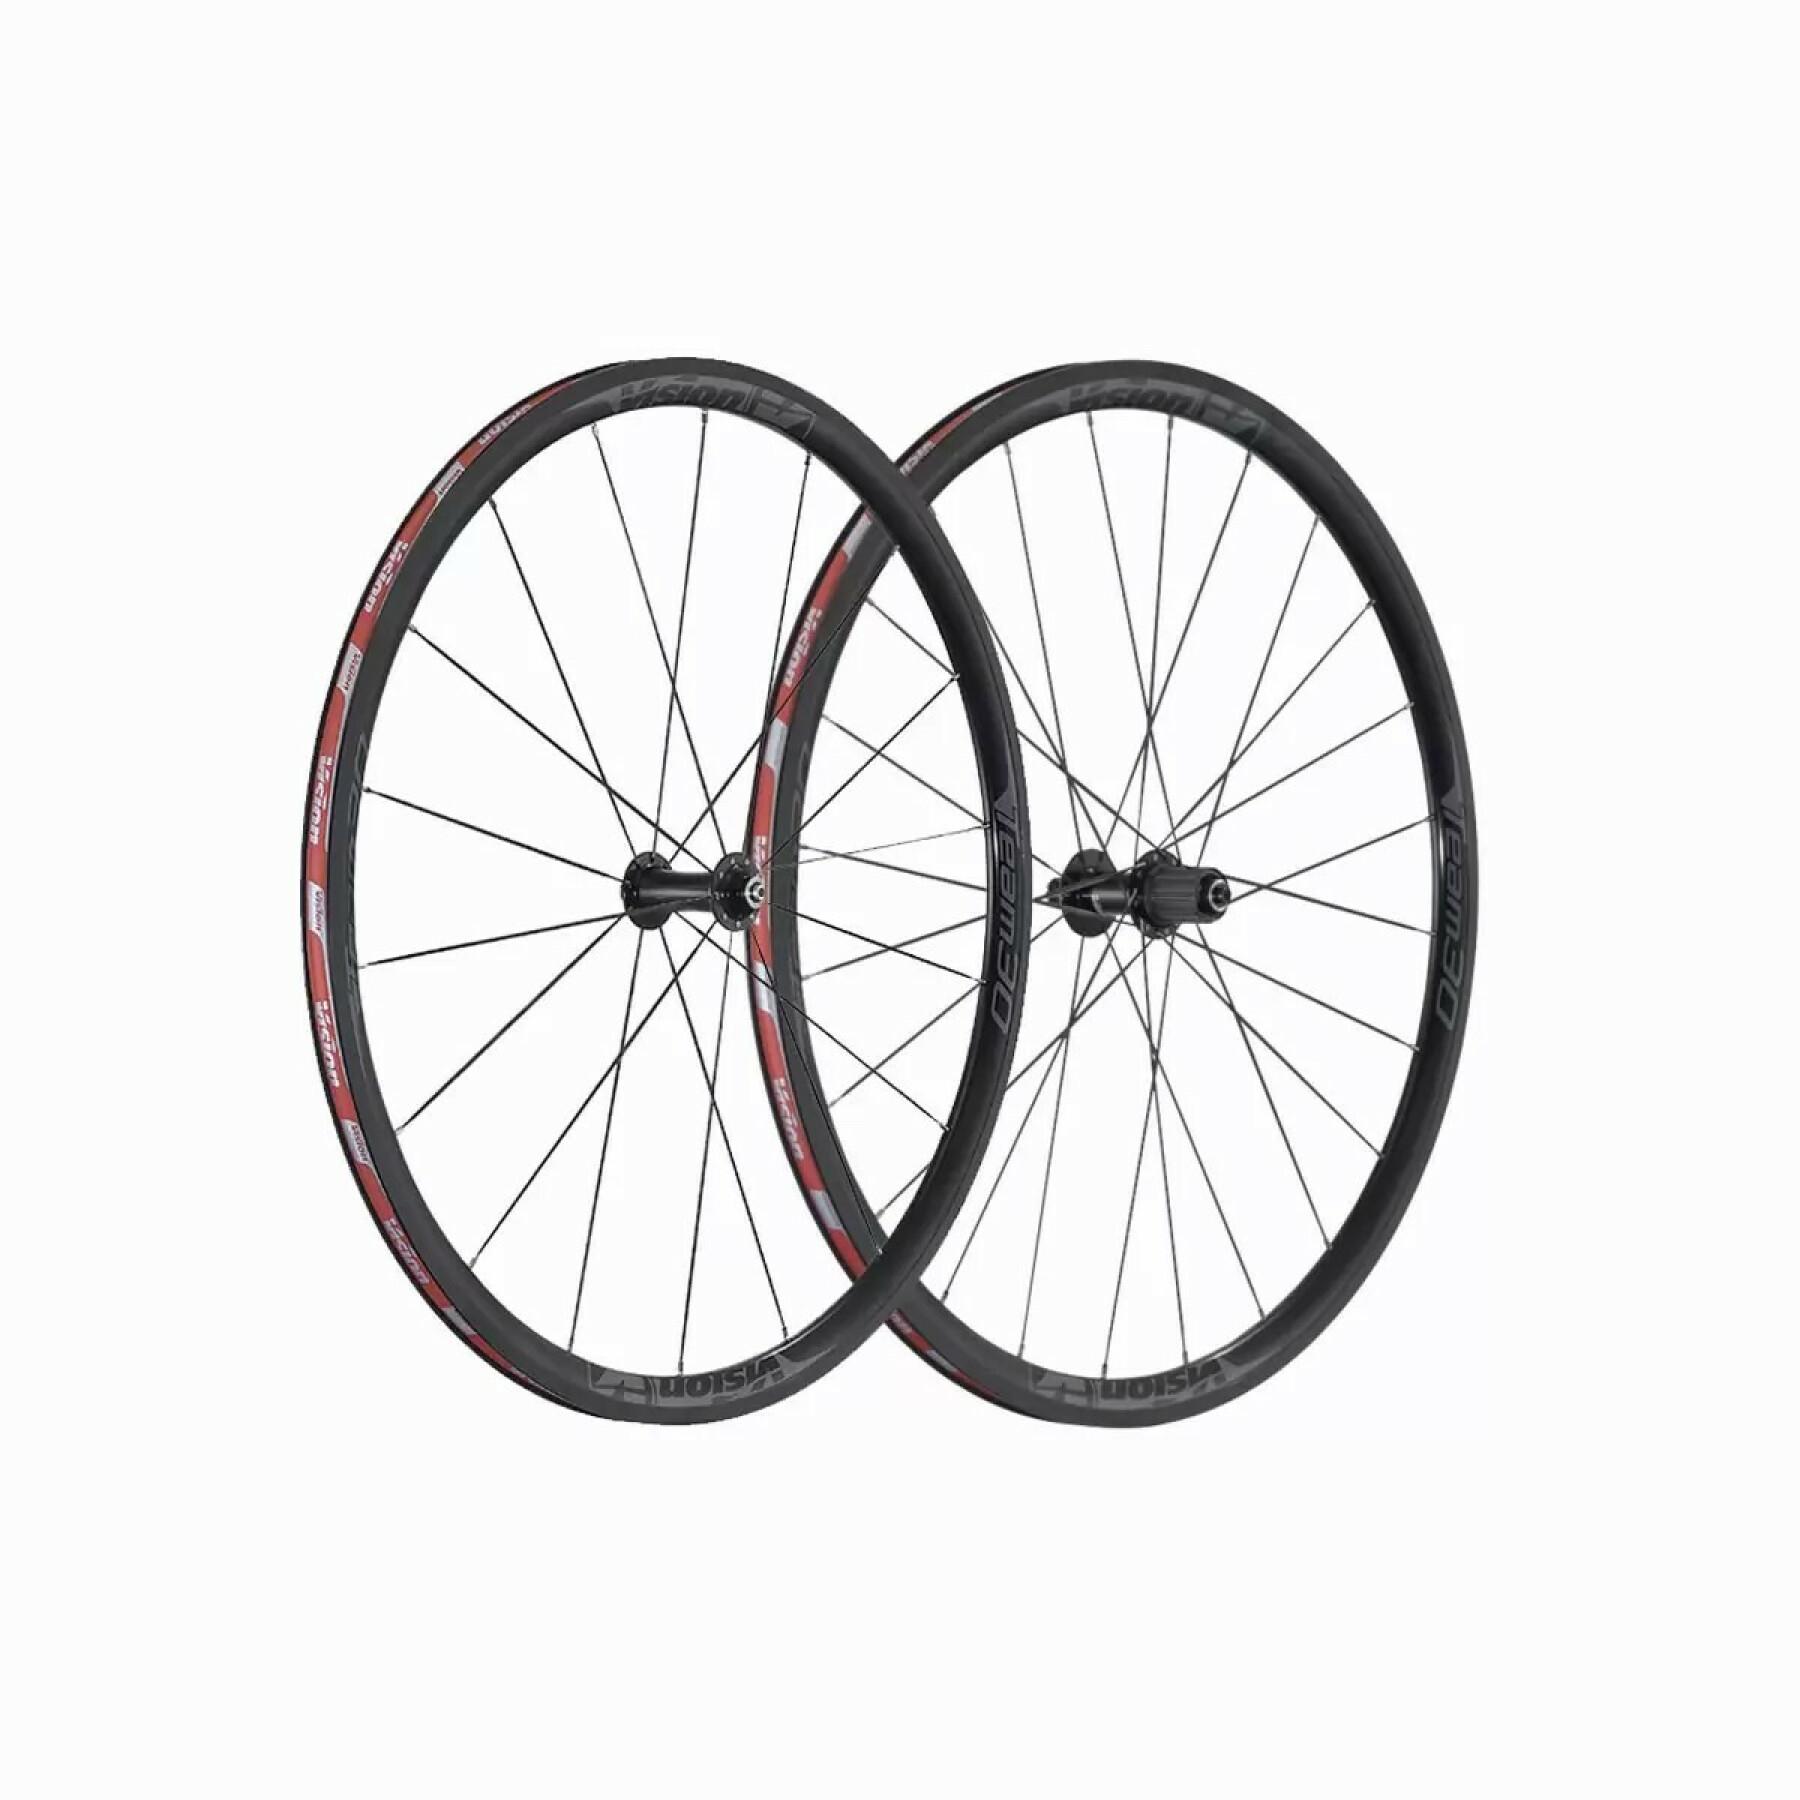 Roues Vision Team 30 corps campagnolo 11V